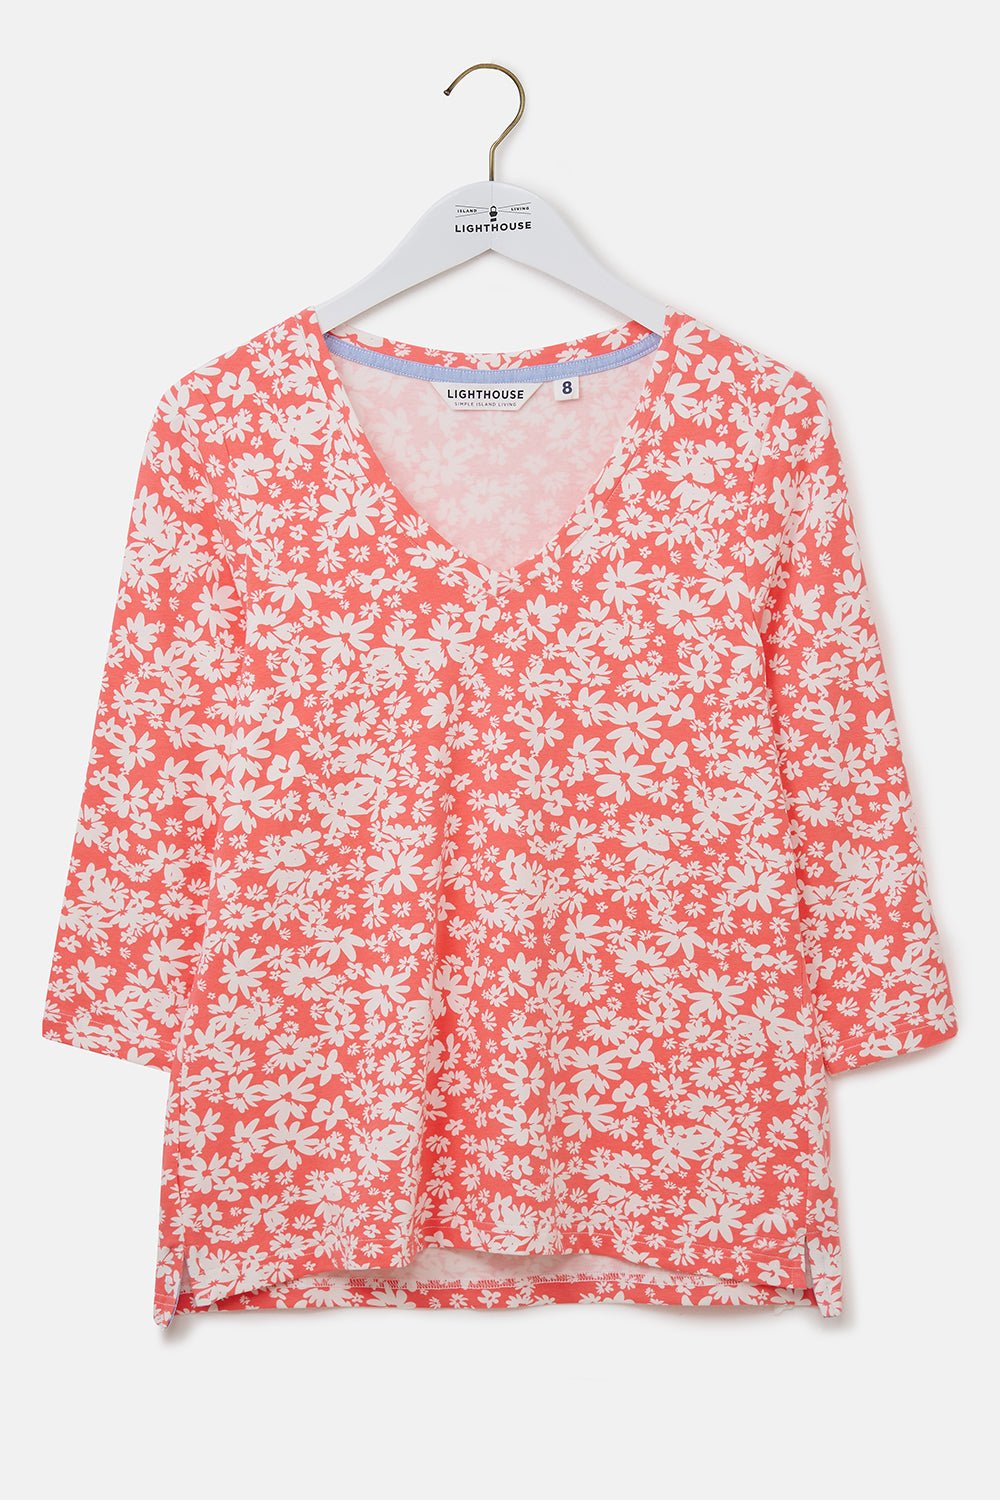 Lighthouse Ladies Ariana Top - Coral Daisy